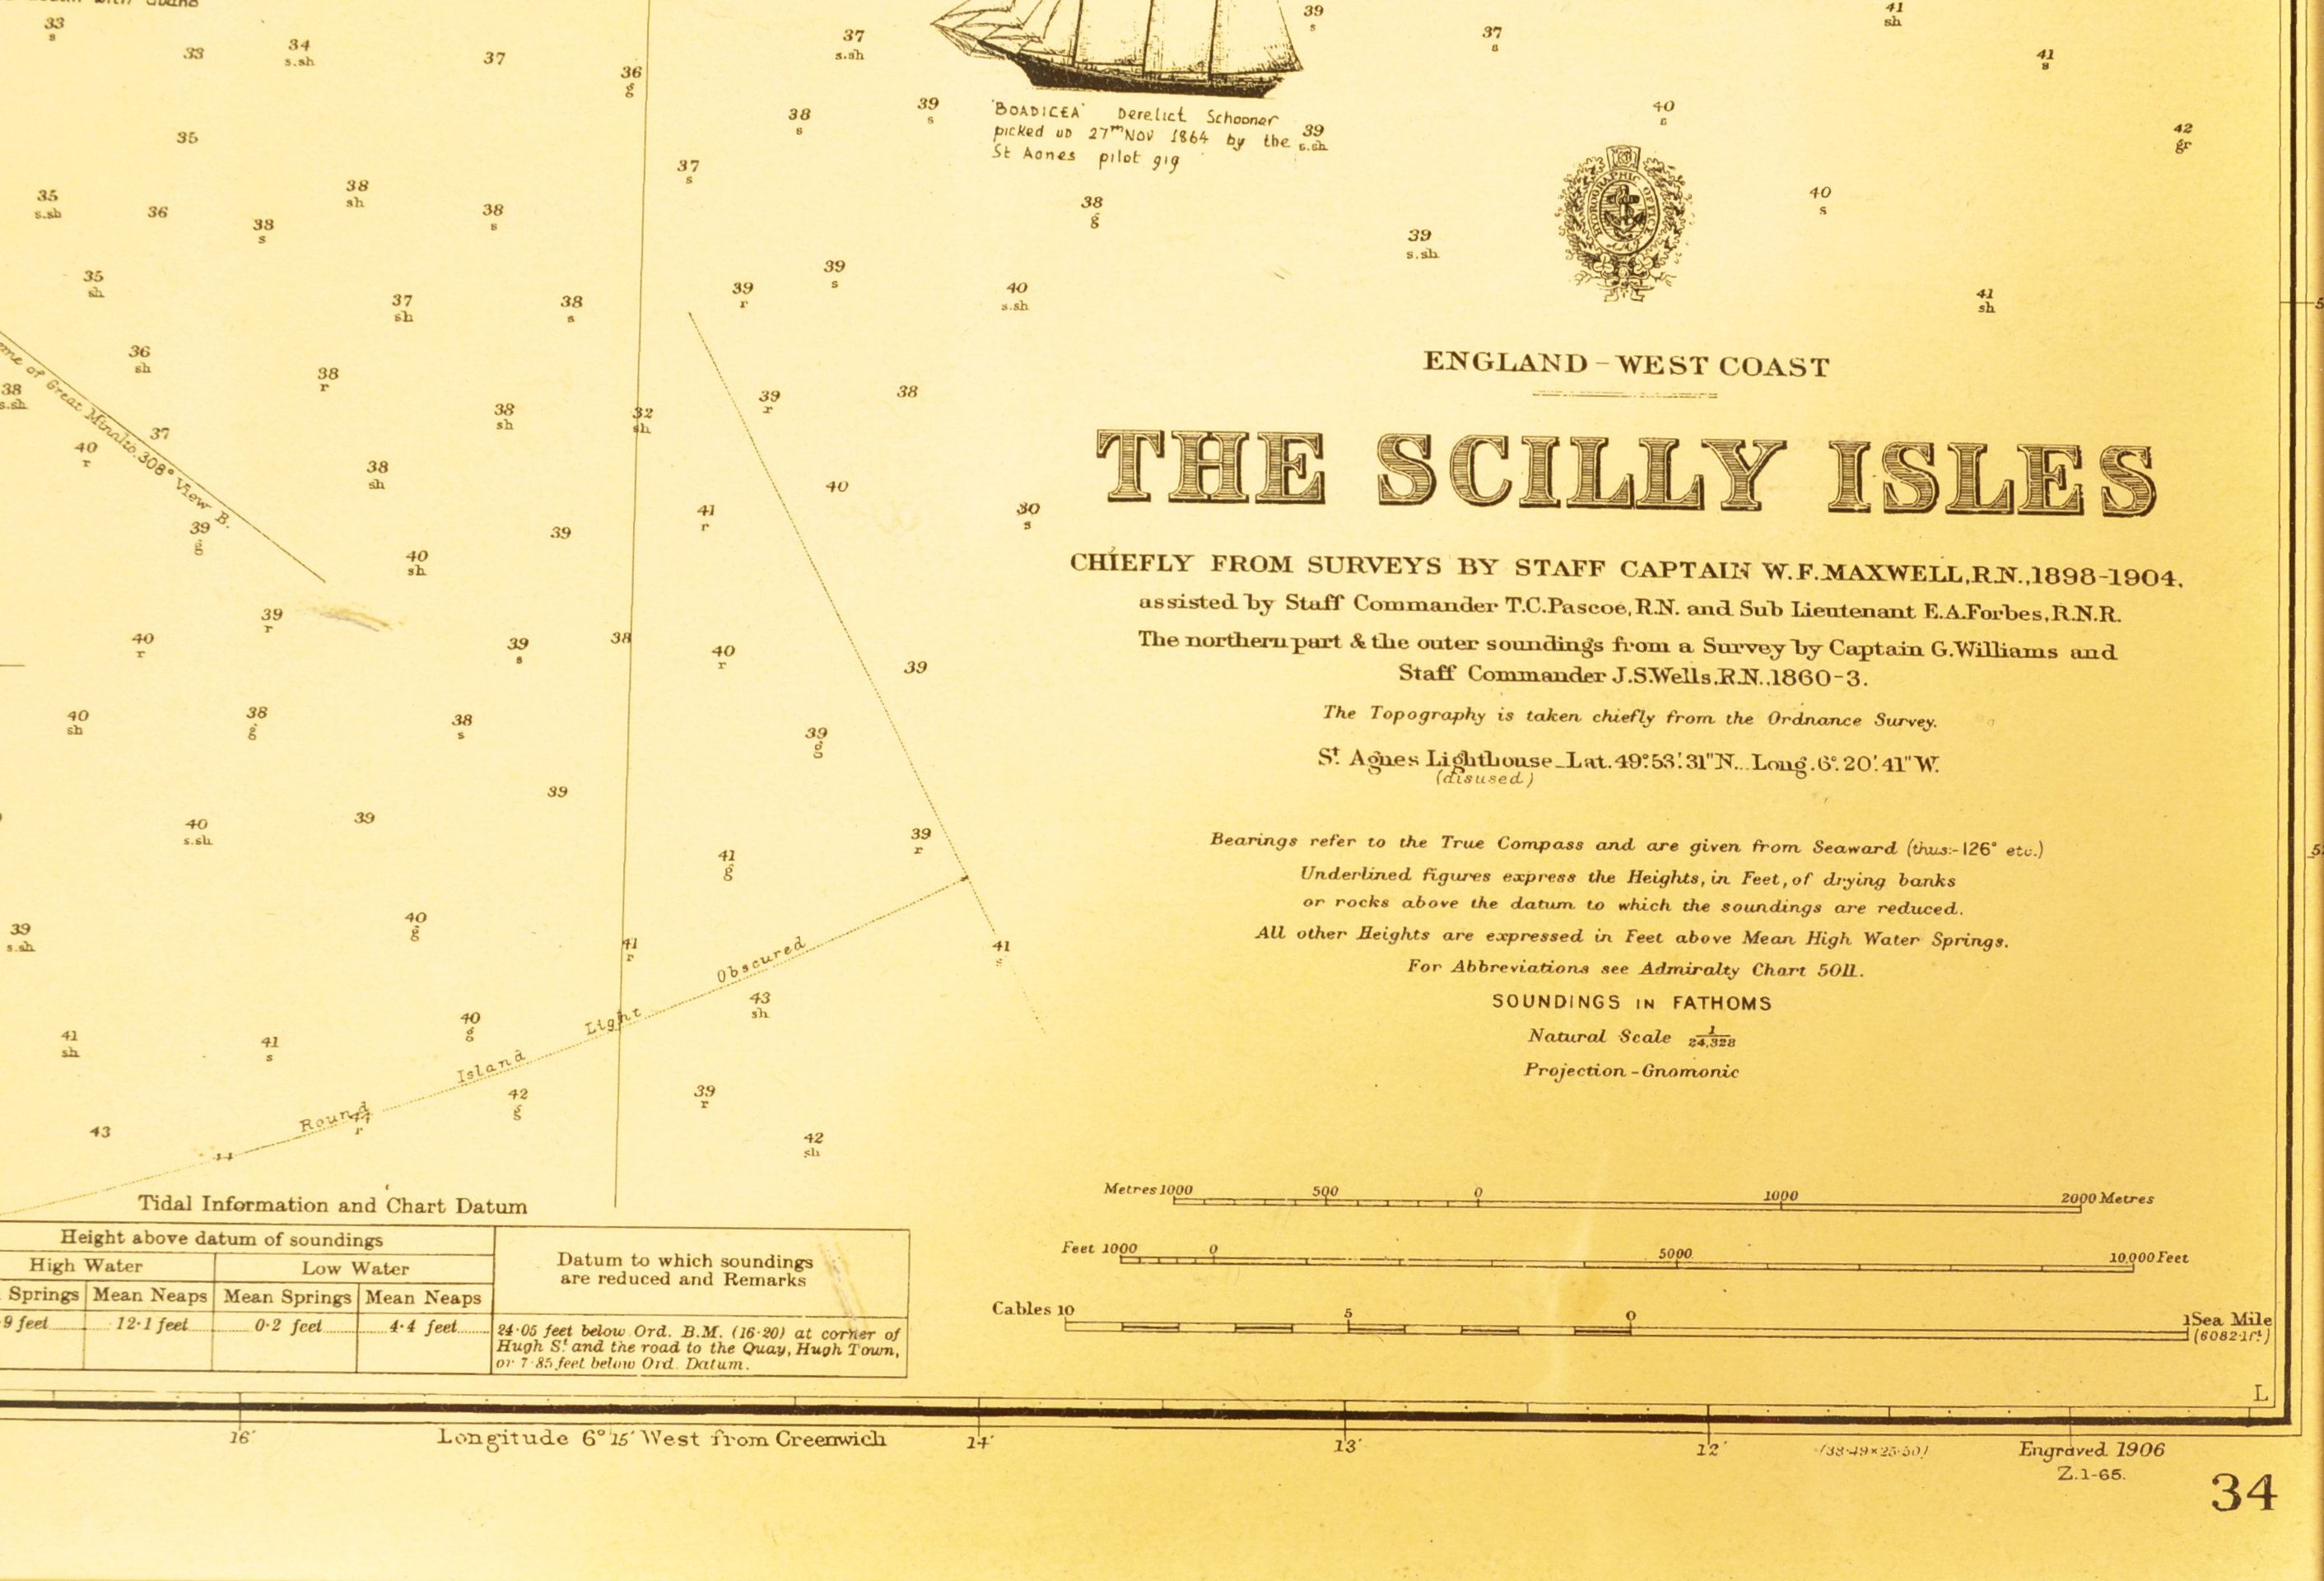 THE SCILLY ISLES - PRINTED SURVEY'S MAP - Image 4 of 5